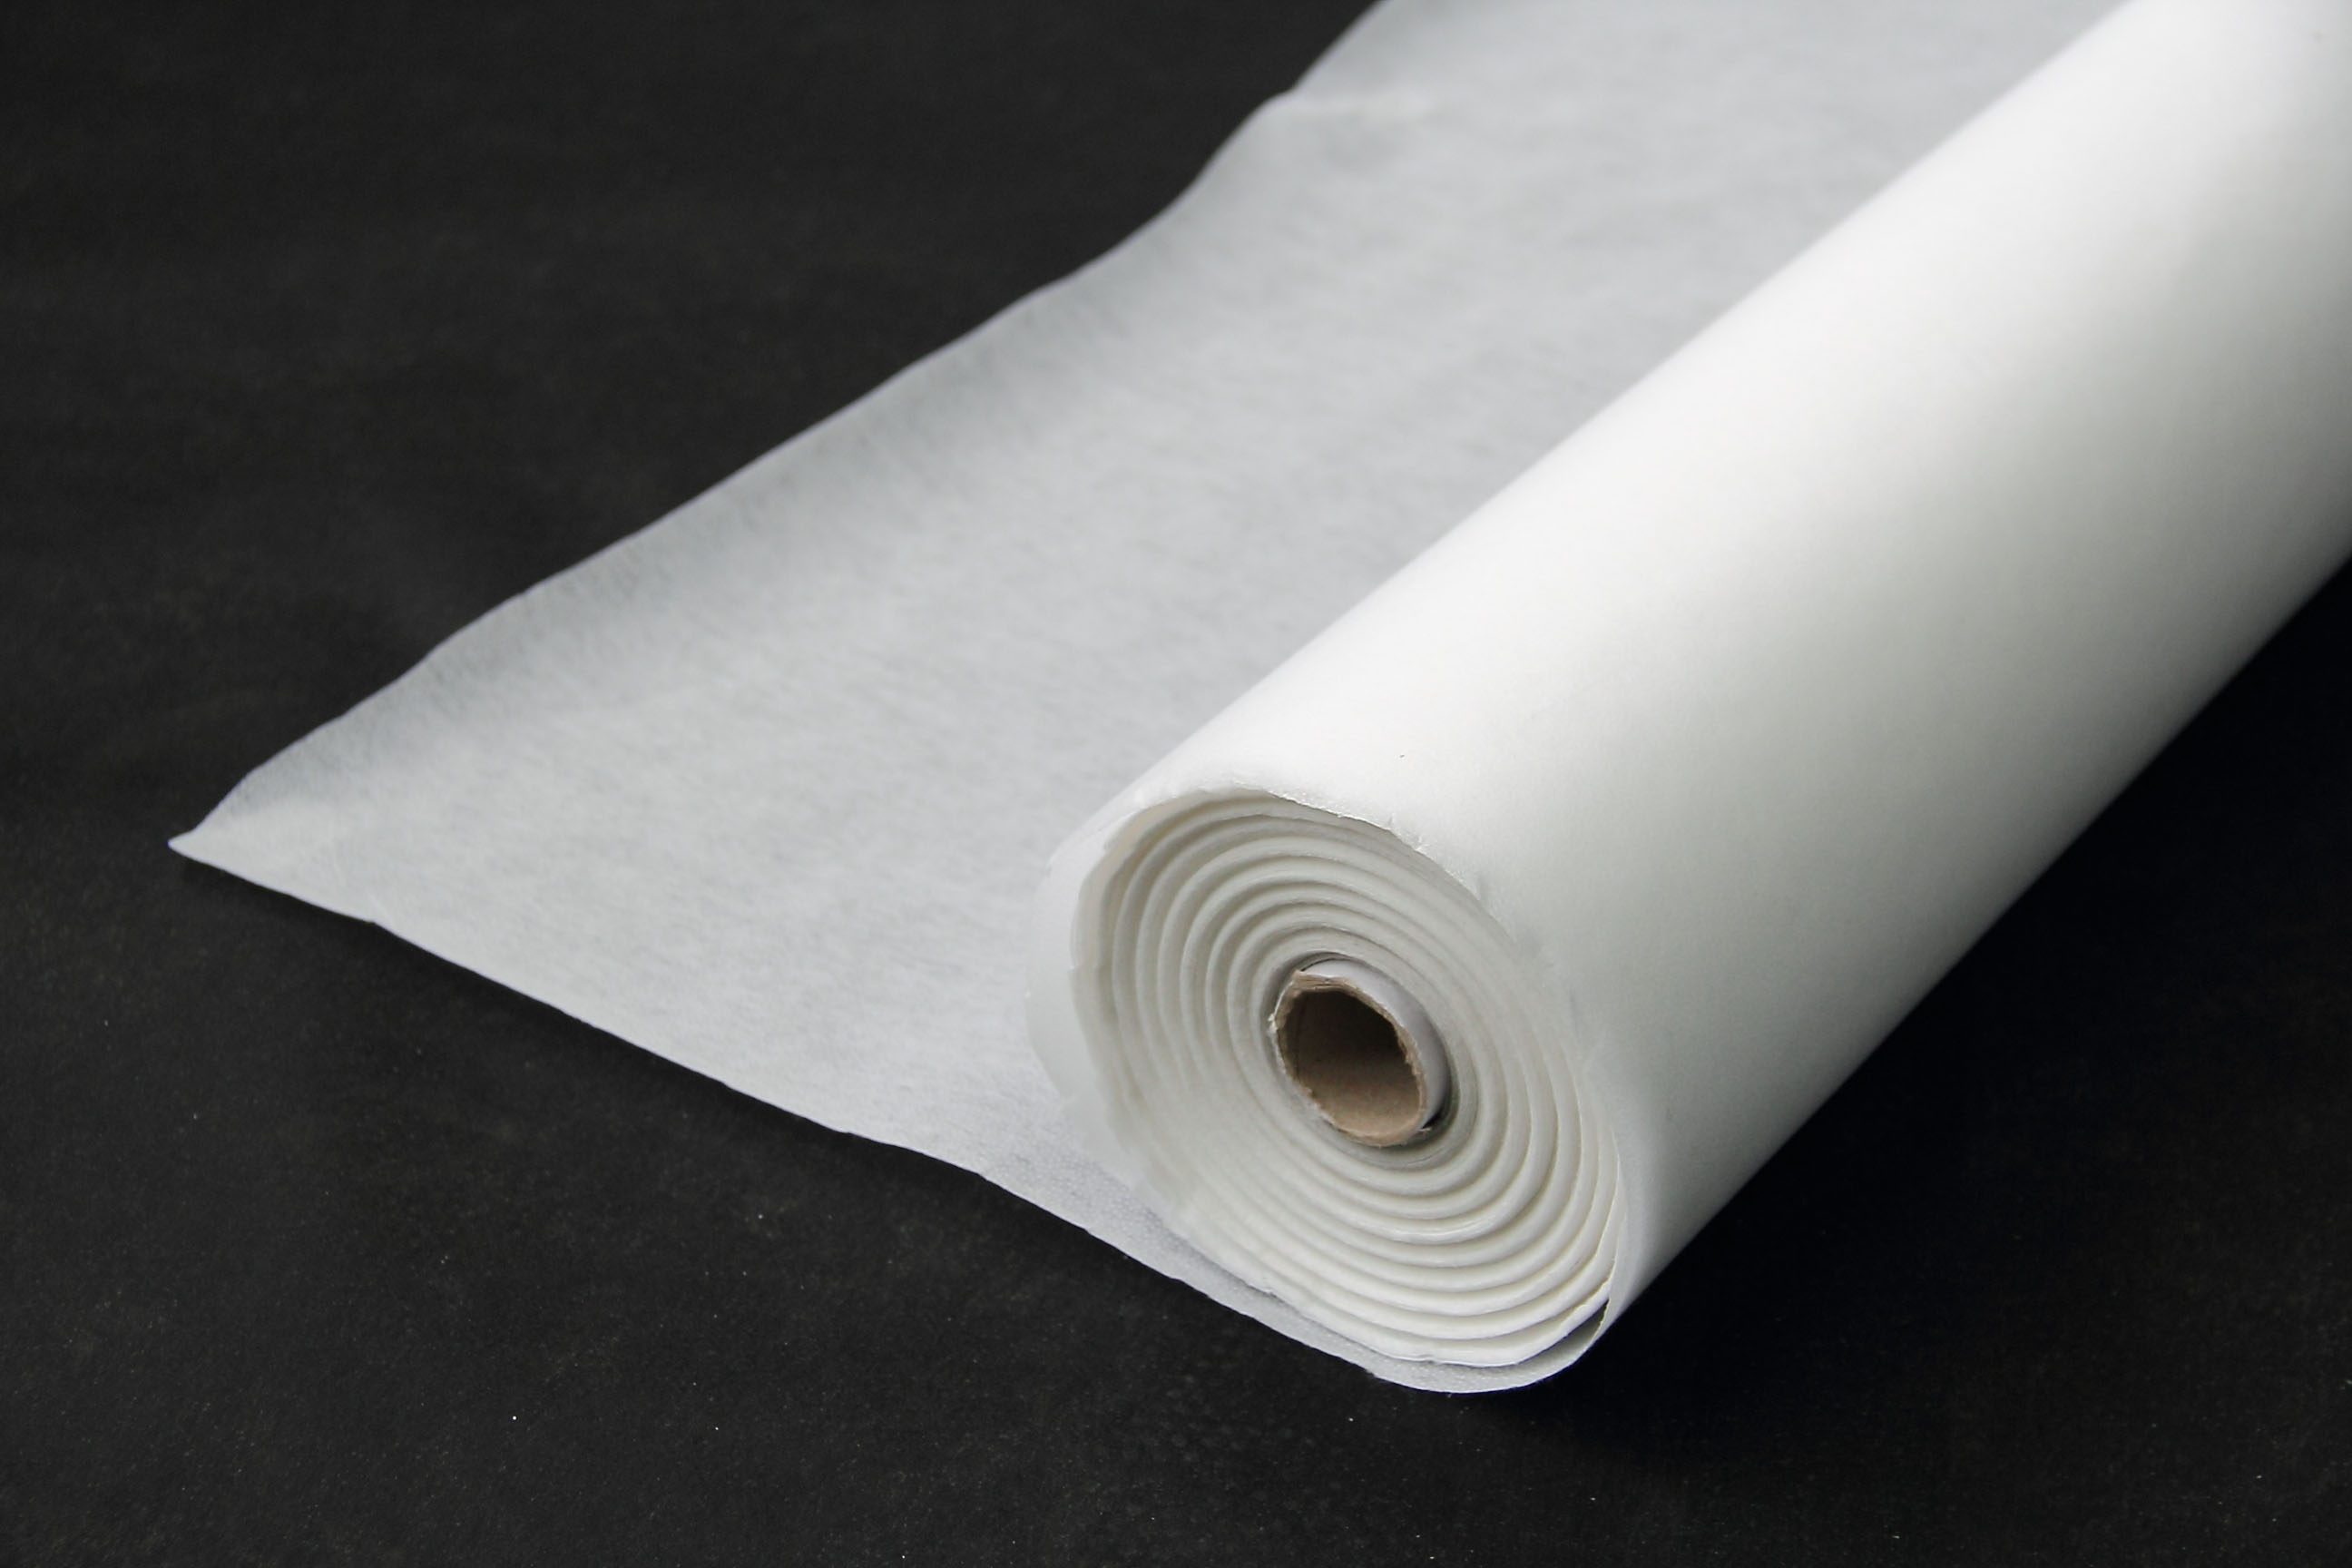 Best High Quality Professional Non-woven interlining With Good Price-XINYU Non-woven Oem With Good Price